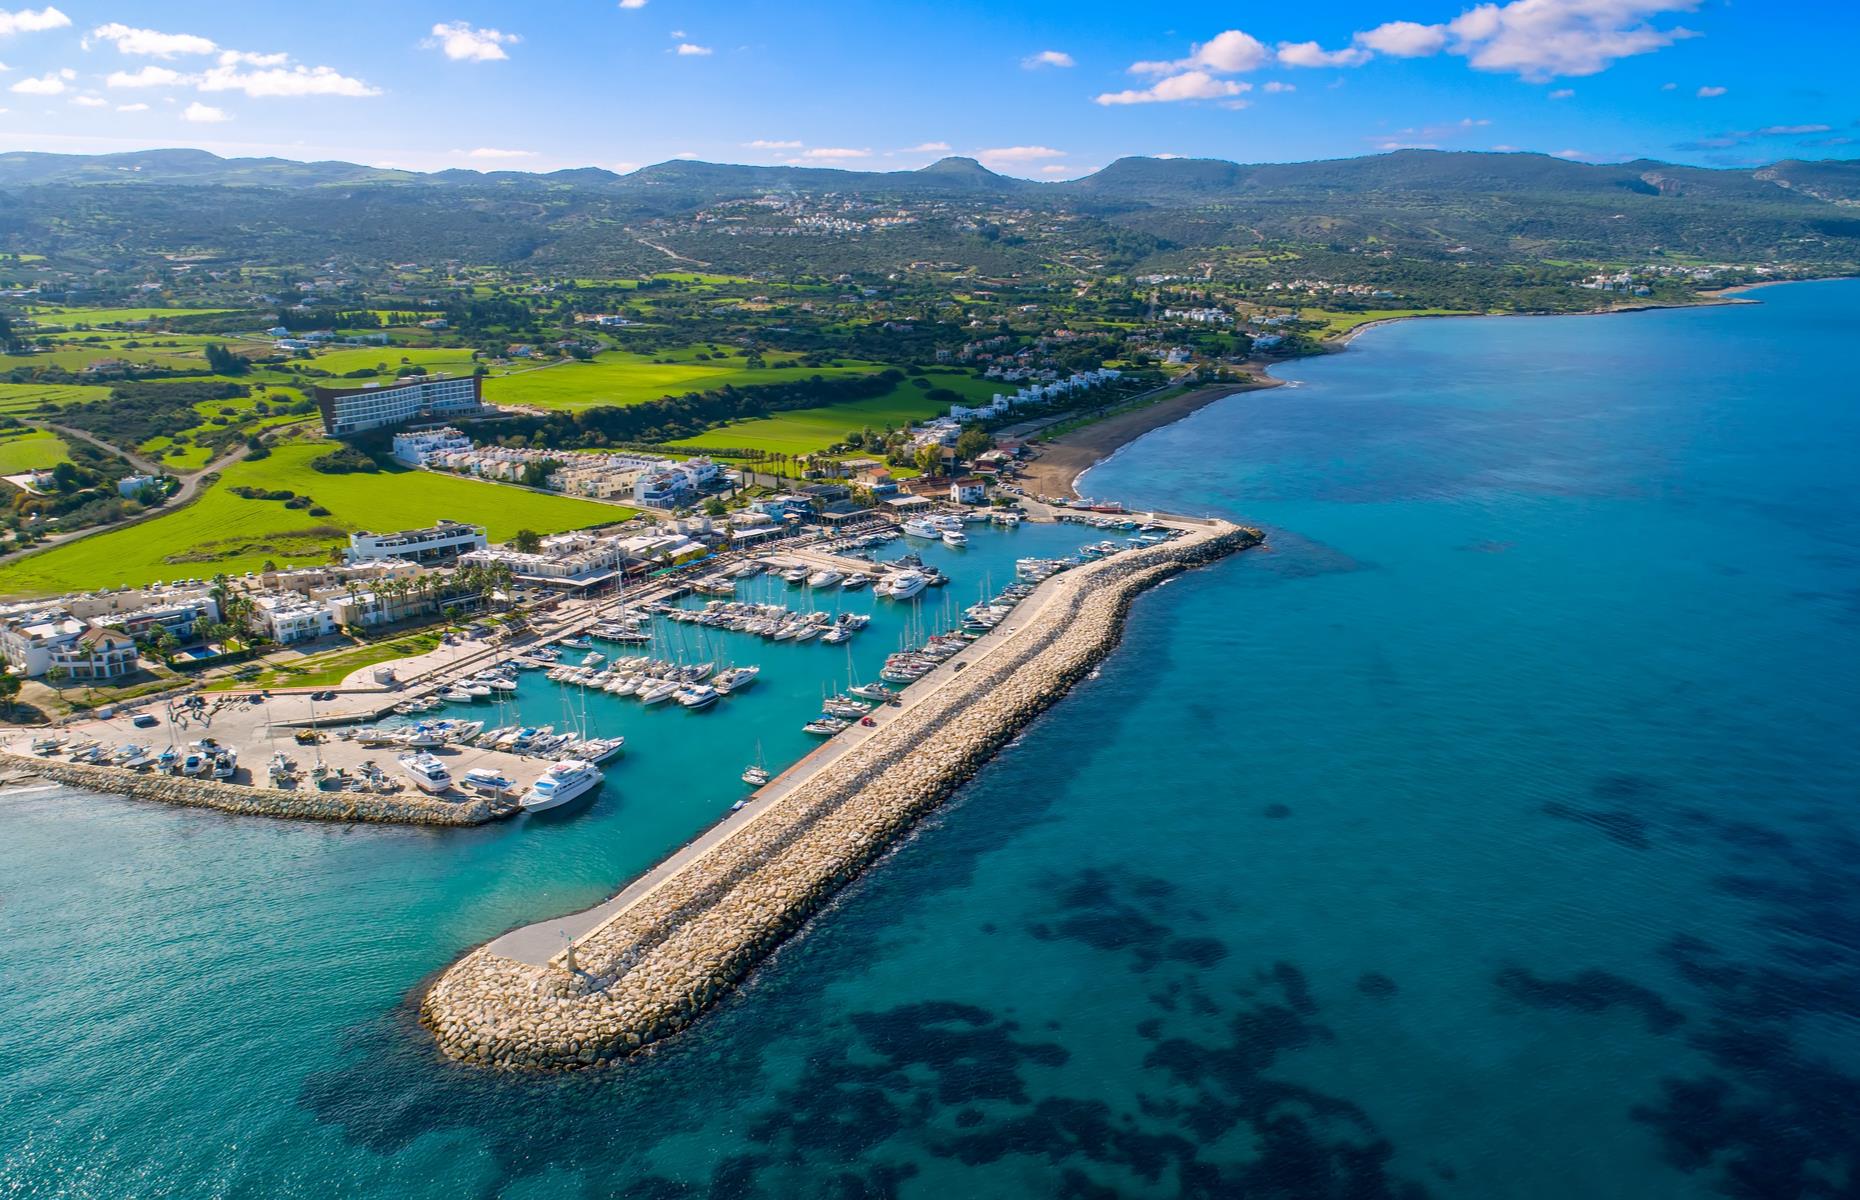 <p>Latchi, located on the Akamas Peninsula in northwestern Cyprus, is a pretty fishing region home to fish markets, cafés, bars and restaurants serving the catch of the day. Seen from above, the idyllic boating harbor is a stunning sight against the lush green Akamas National Park.</p>